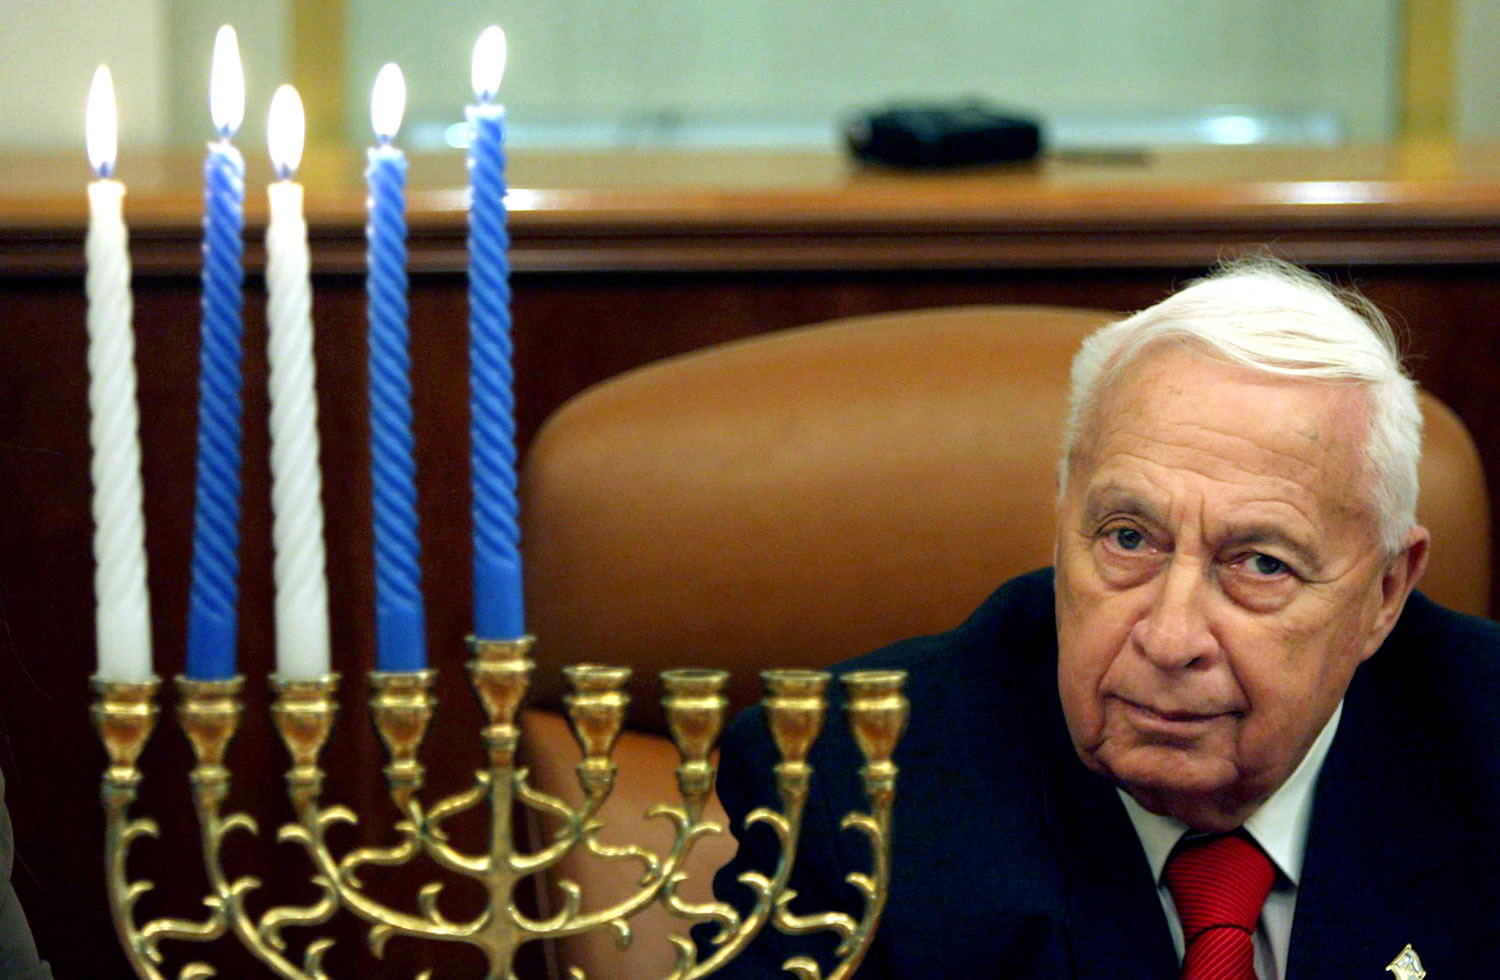 Israeli Prime Minister Ariel Sharon takes part in the lighting of the fourth Hanukkah candle, at his Jerusalem office Dec. 27, 2005. Sharon, the hard-charging Israeli general and prime minister who was admired and hated for his battlefield exploits and ambitions to reshape the Middle East, died Saturday.